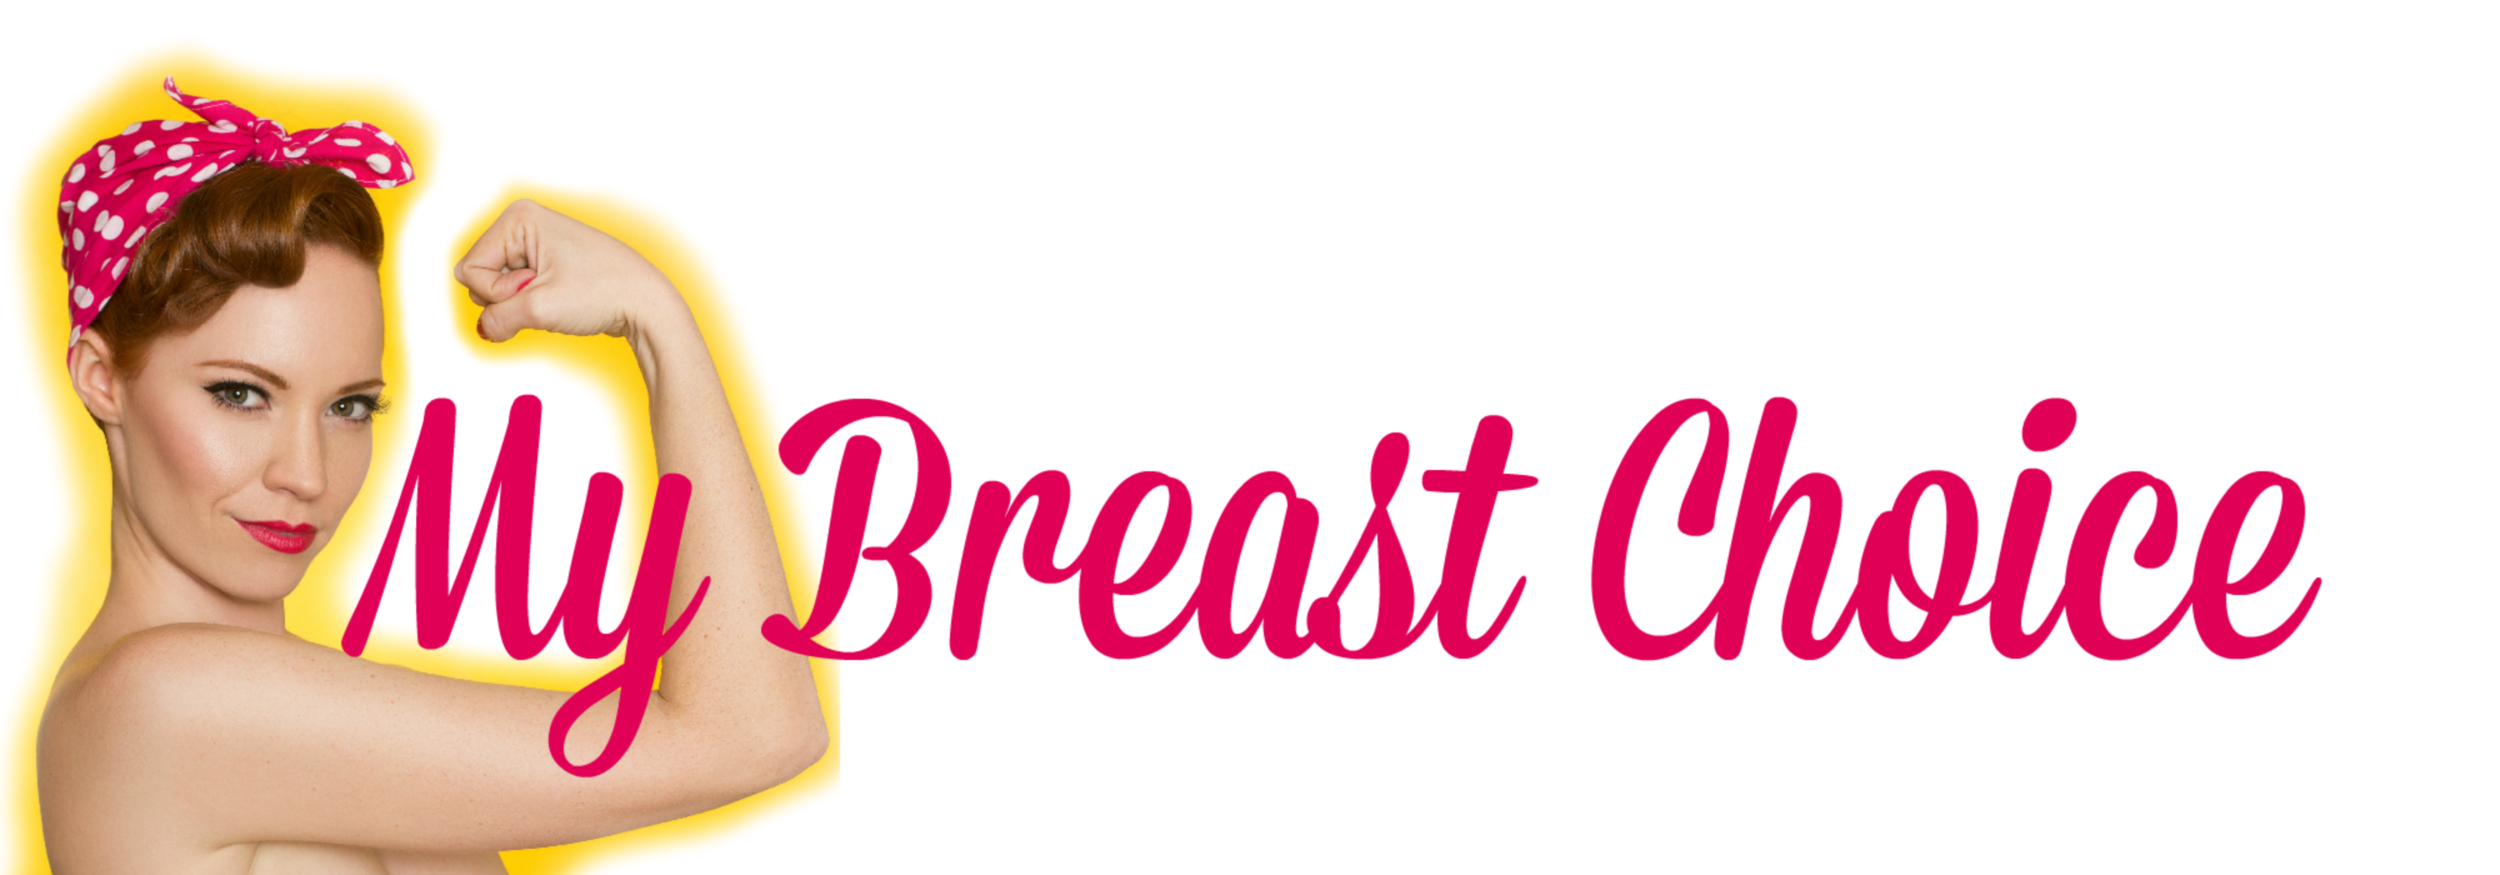 About — My Breast Choice